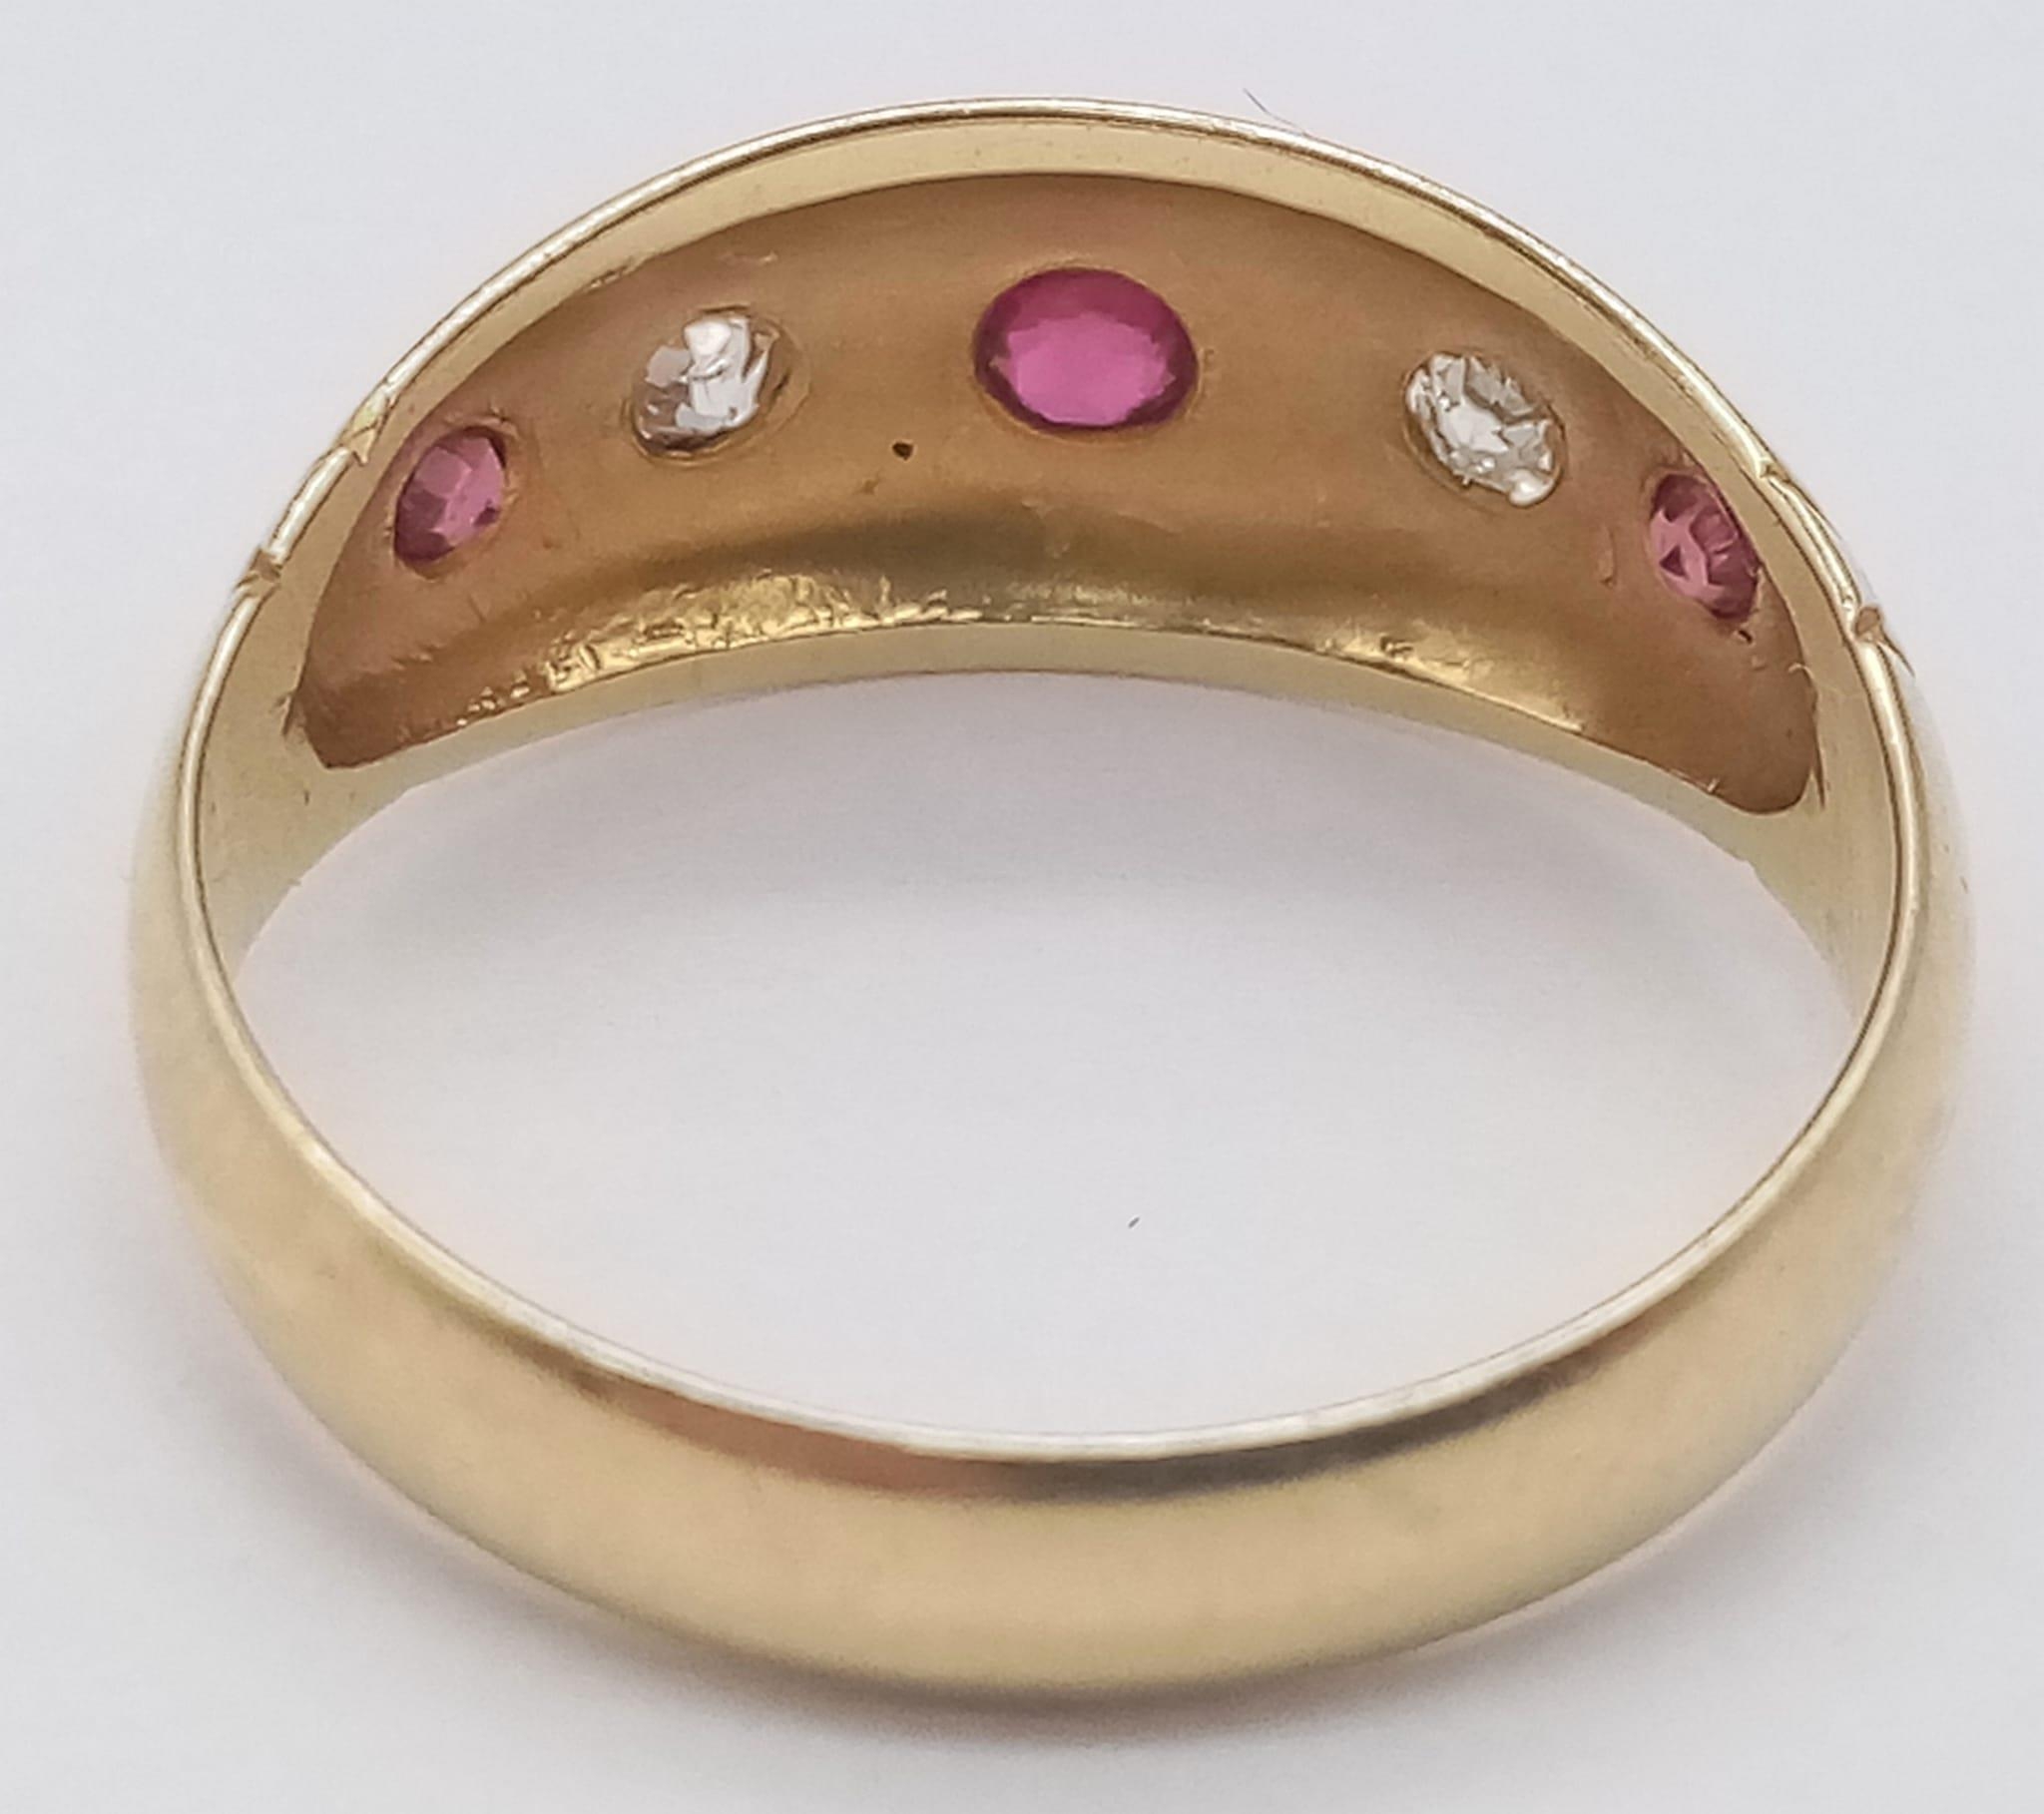 A VINTAGE 18K YELLOW GOLD, OLD CUT DIAMOND & RUBY RING. Size M/N, 2.5g total weight. - Image 4 of 5